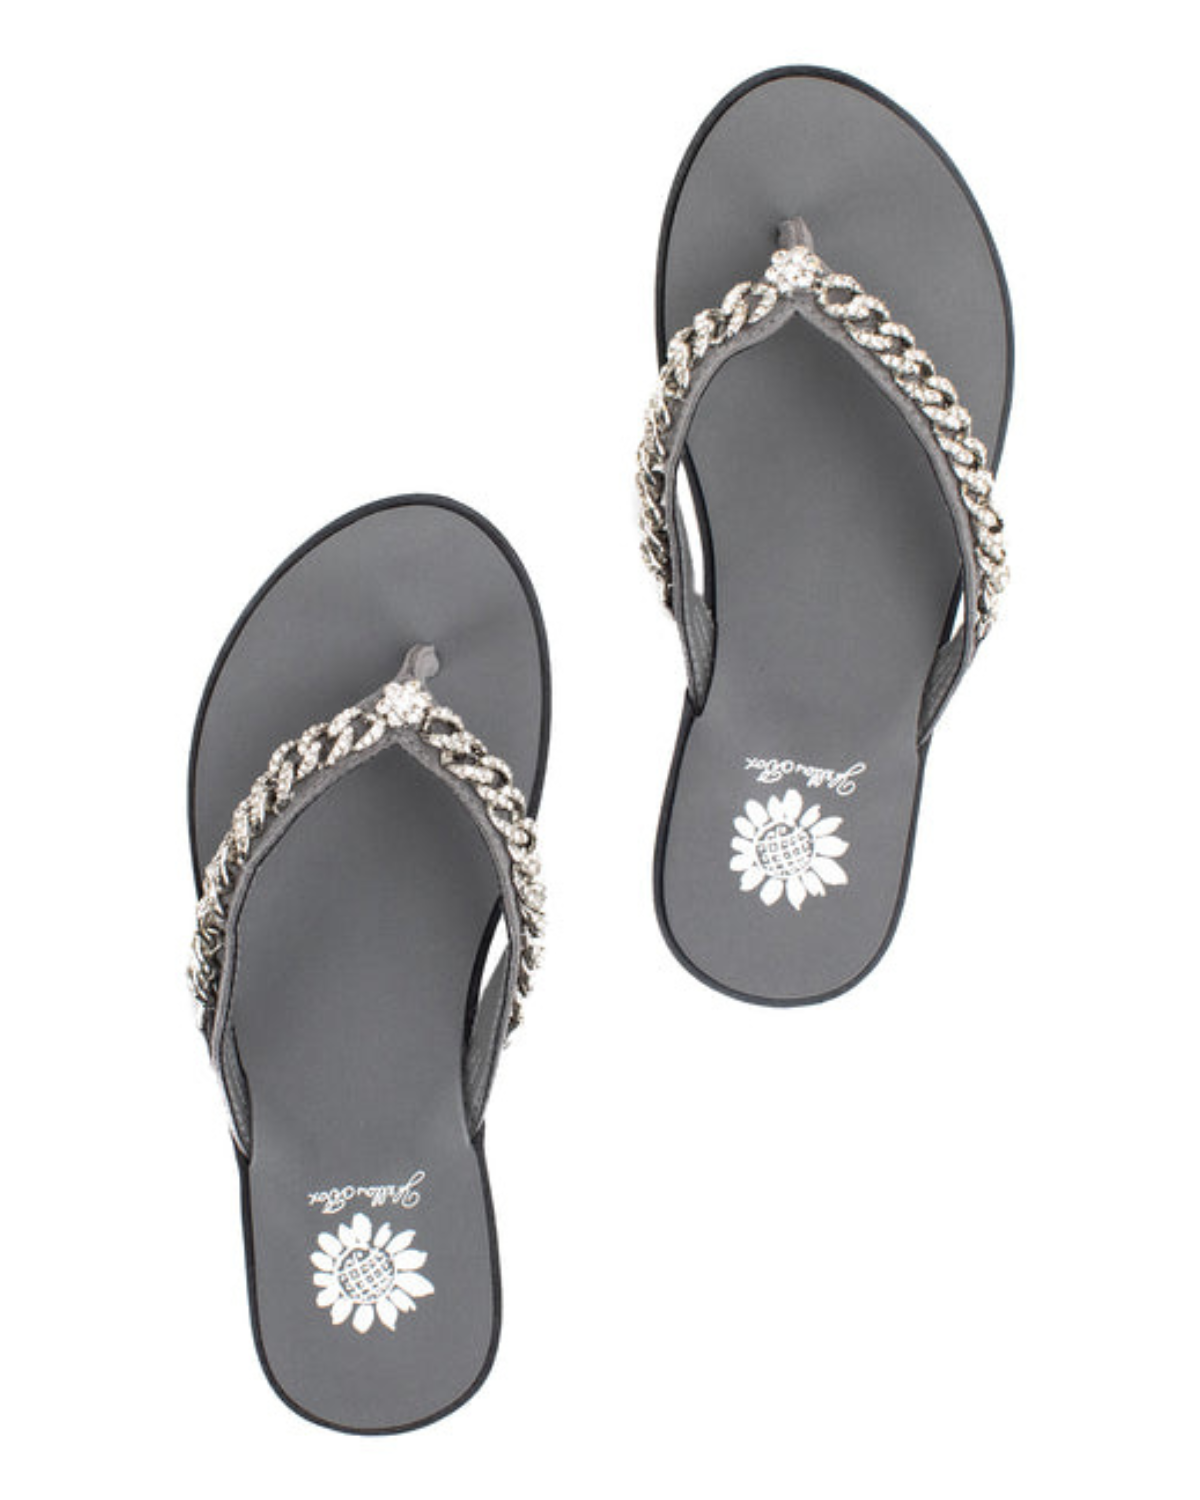 Women's grey sandal with silver chain detail on the strap.